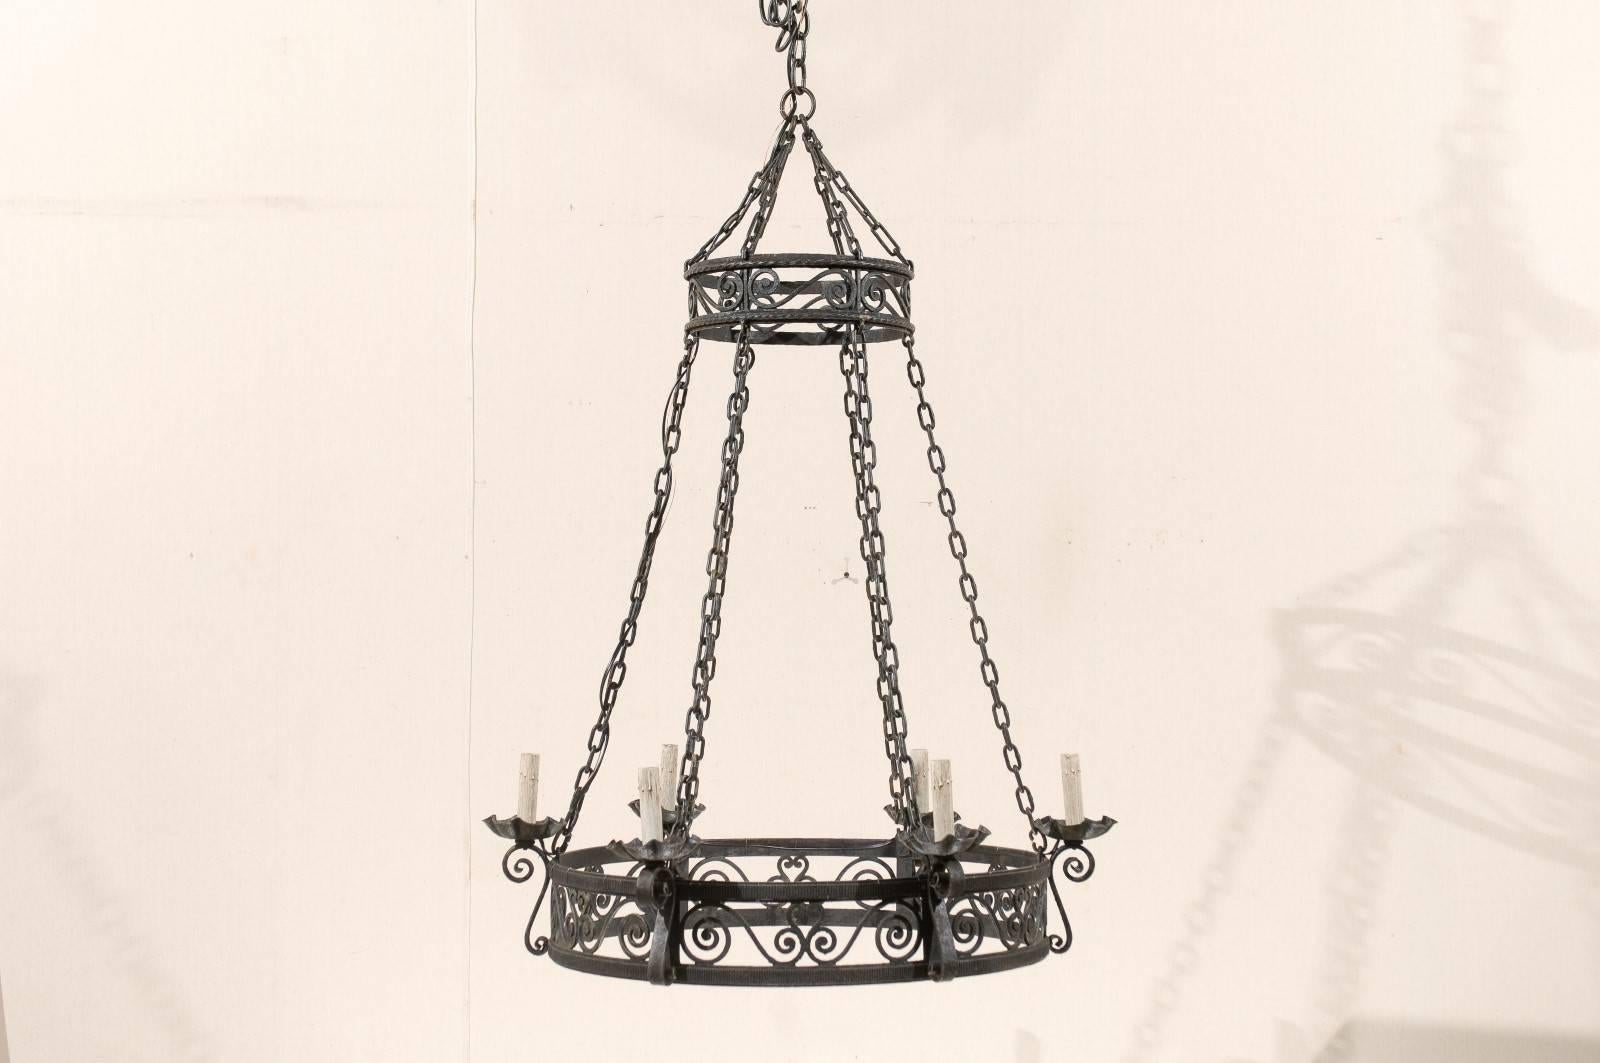 A French circular iron six-light chandelier. This elegant French chandelier from the mid-20th century features a central ring base with stylized scrolled motifs. There are six scrolled arms that lift off of the central ring and support the metal